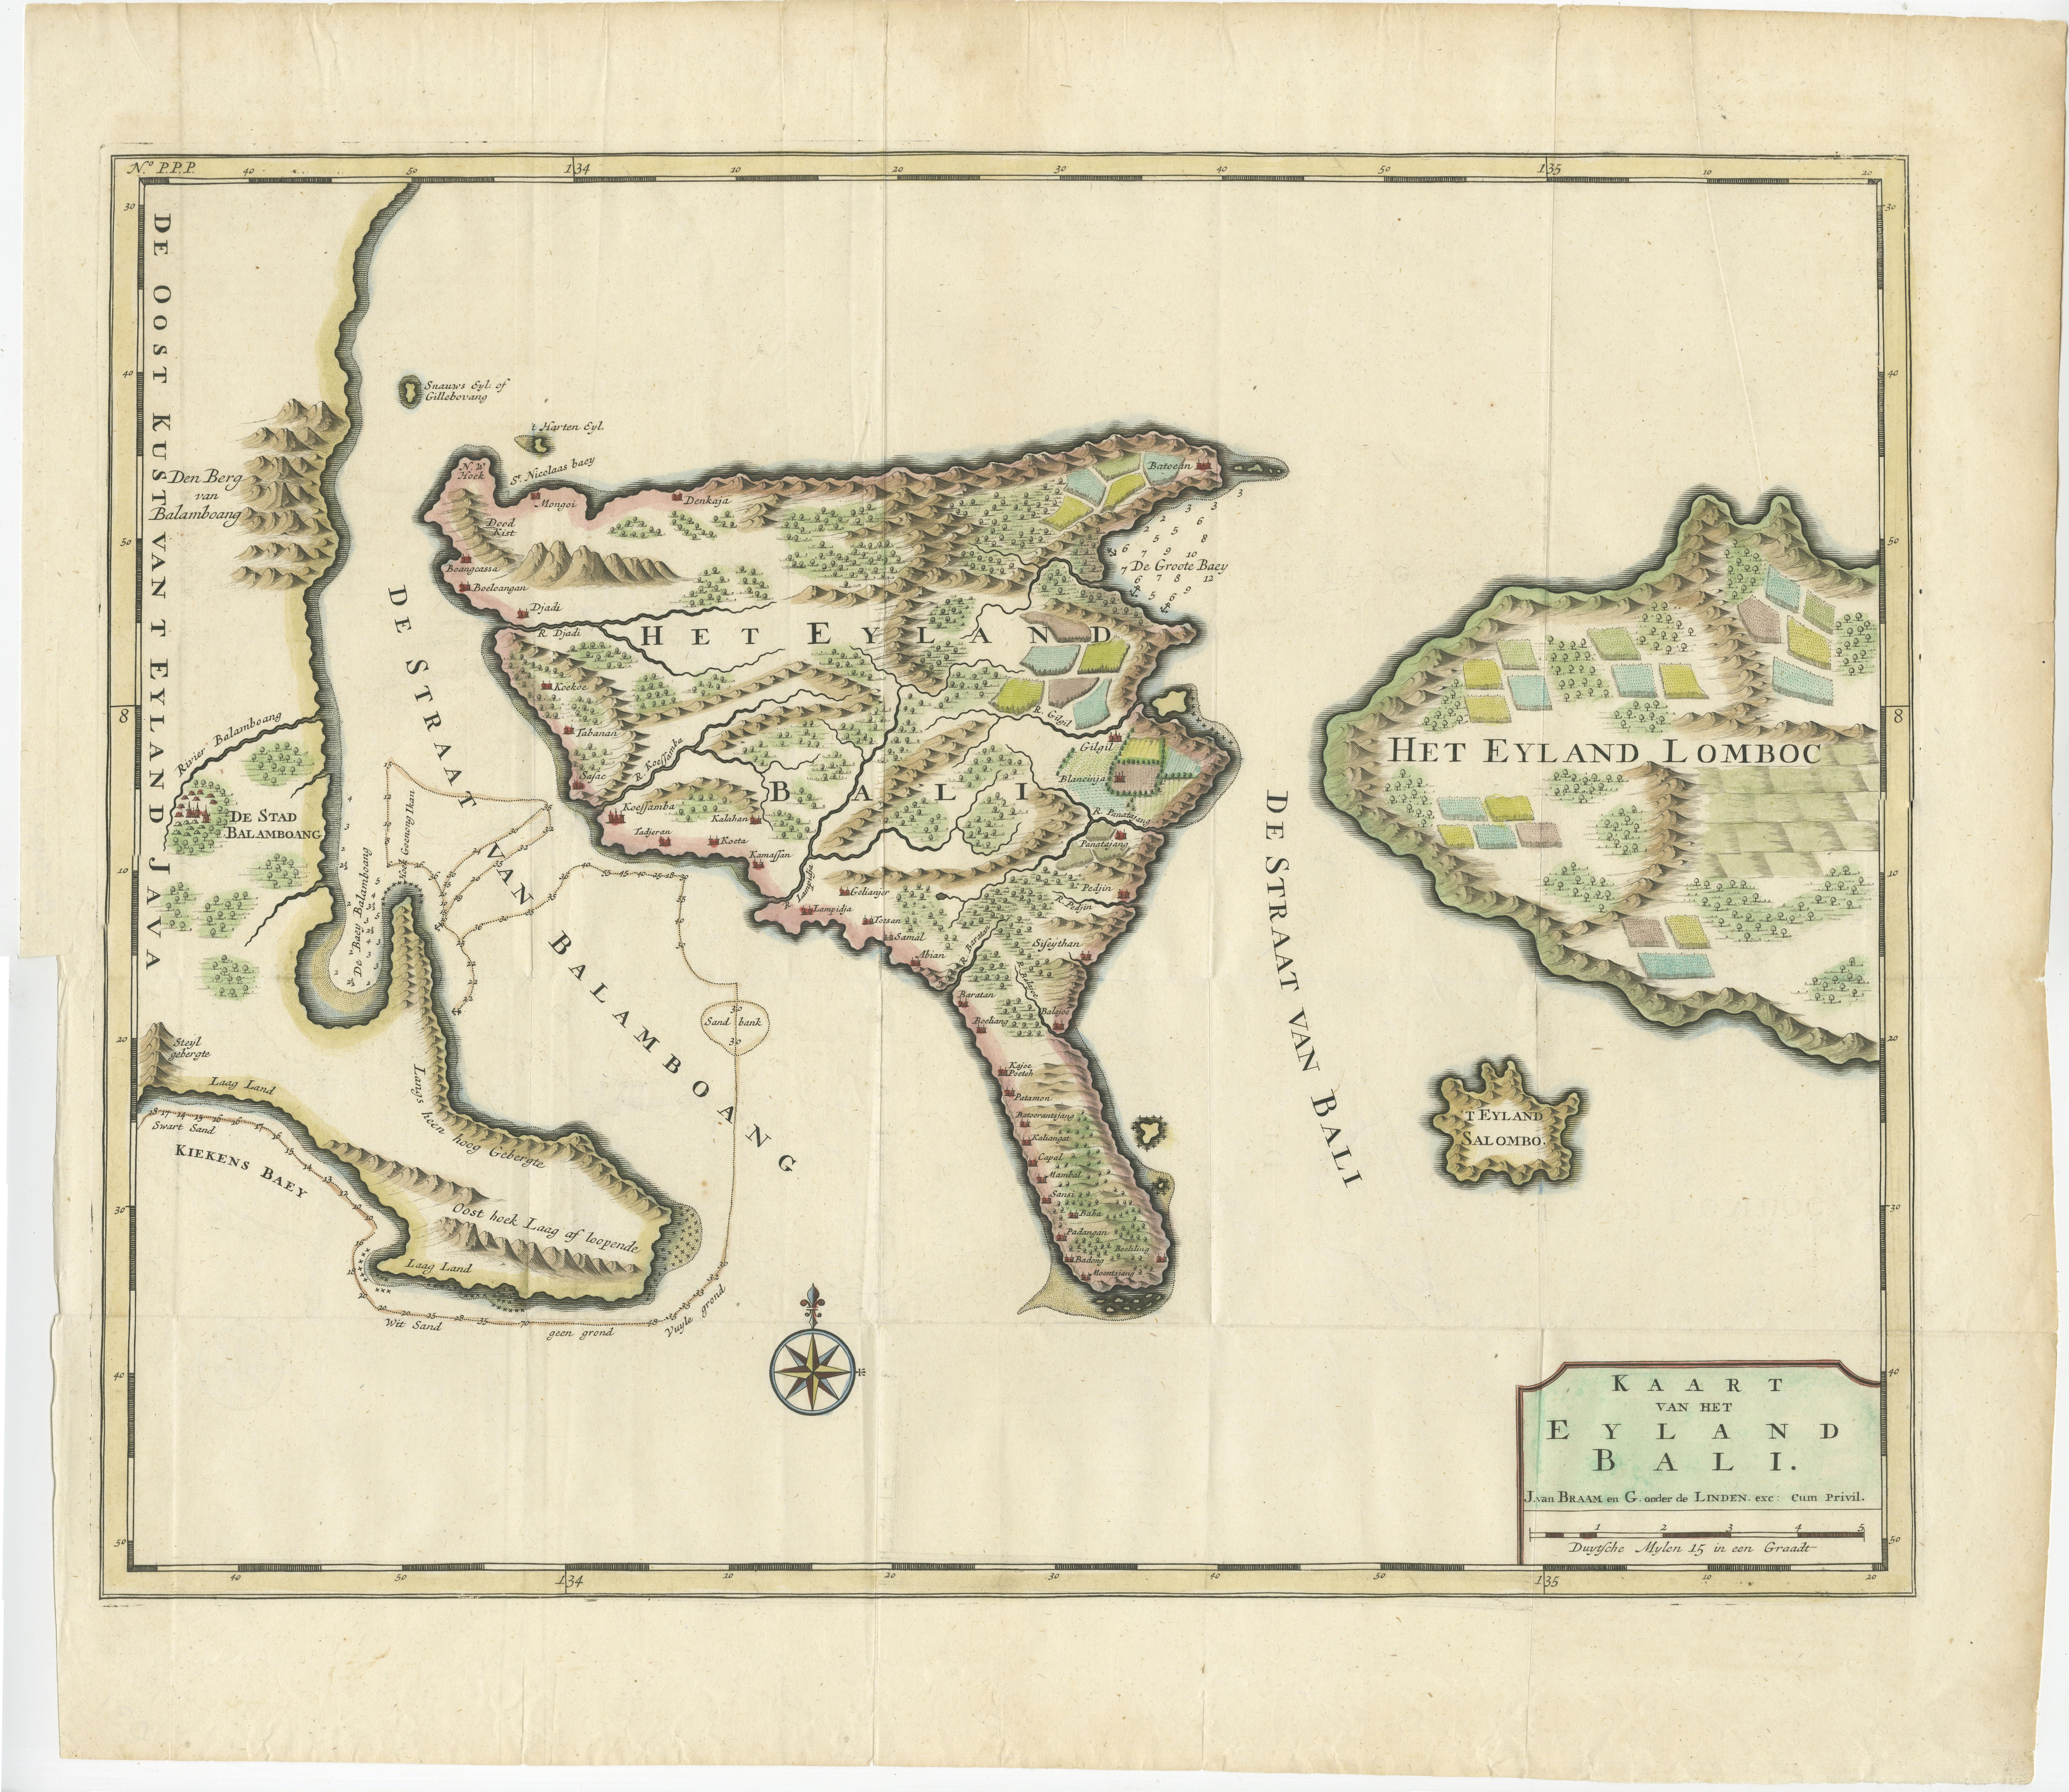 This antique map is a detailed 18th-century chart of the island of Bali, one of the many islands of Indonesia, with an inset of the neighboring island Lombok, attributed to François Valentyn or Valentijn. He was a Dutch minister and author who